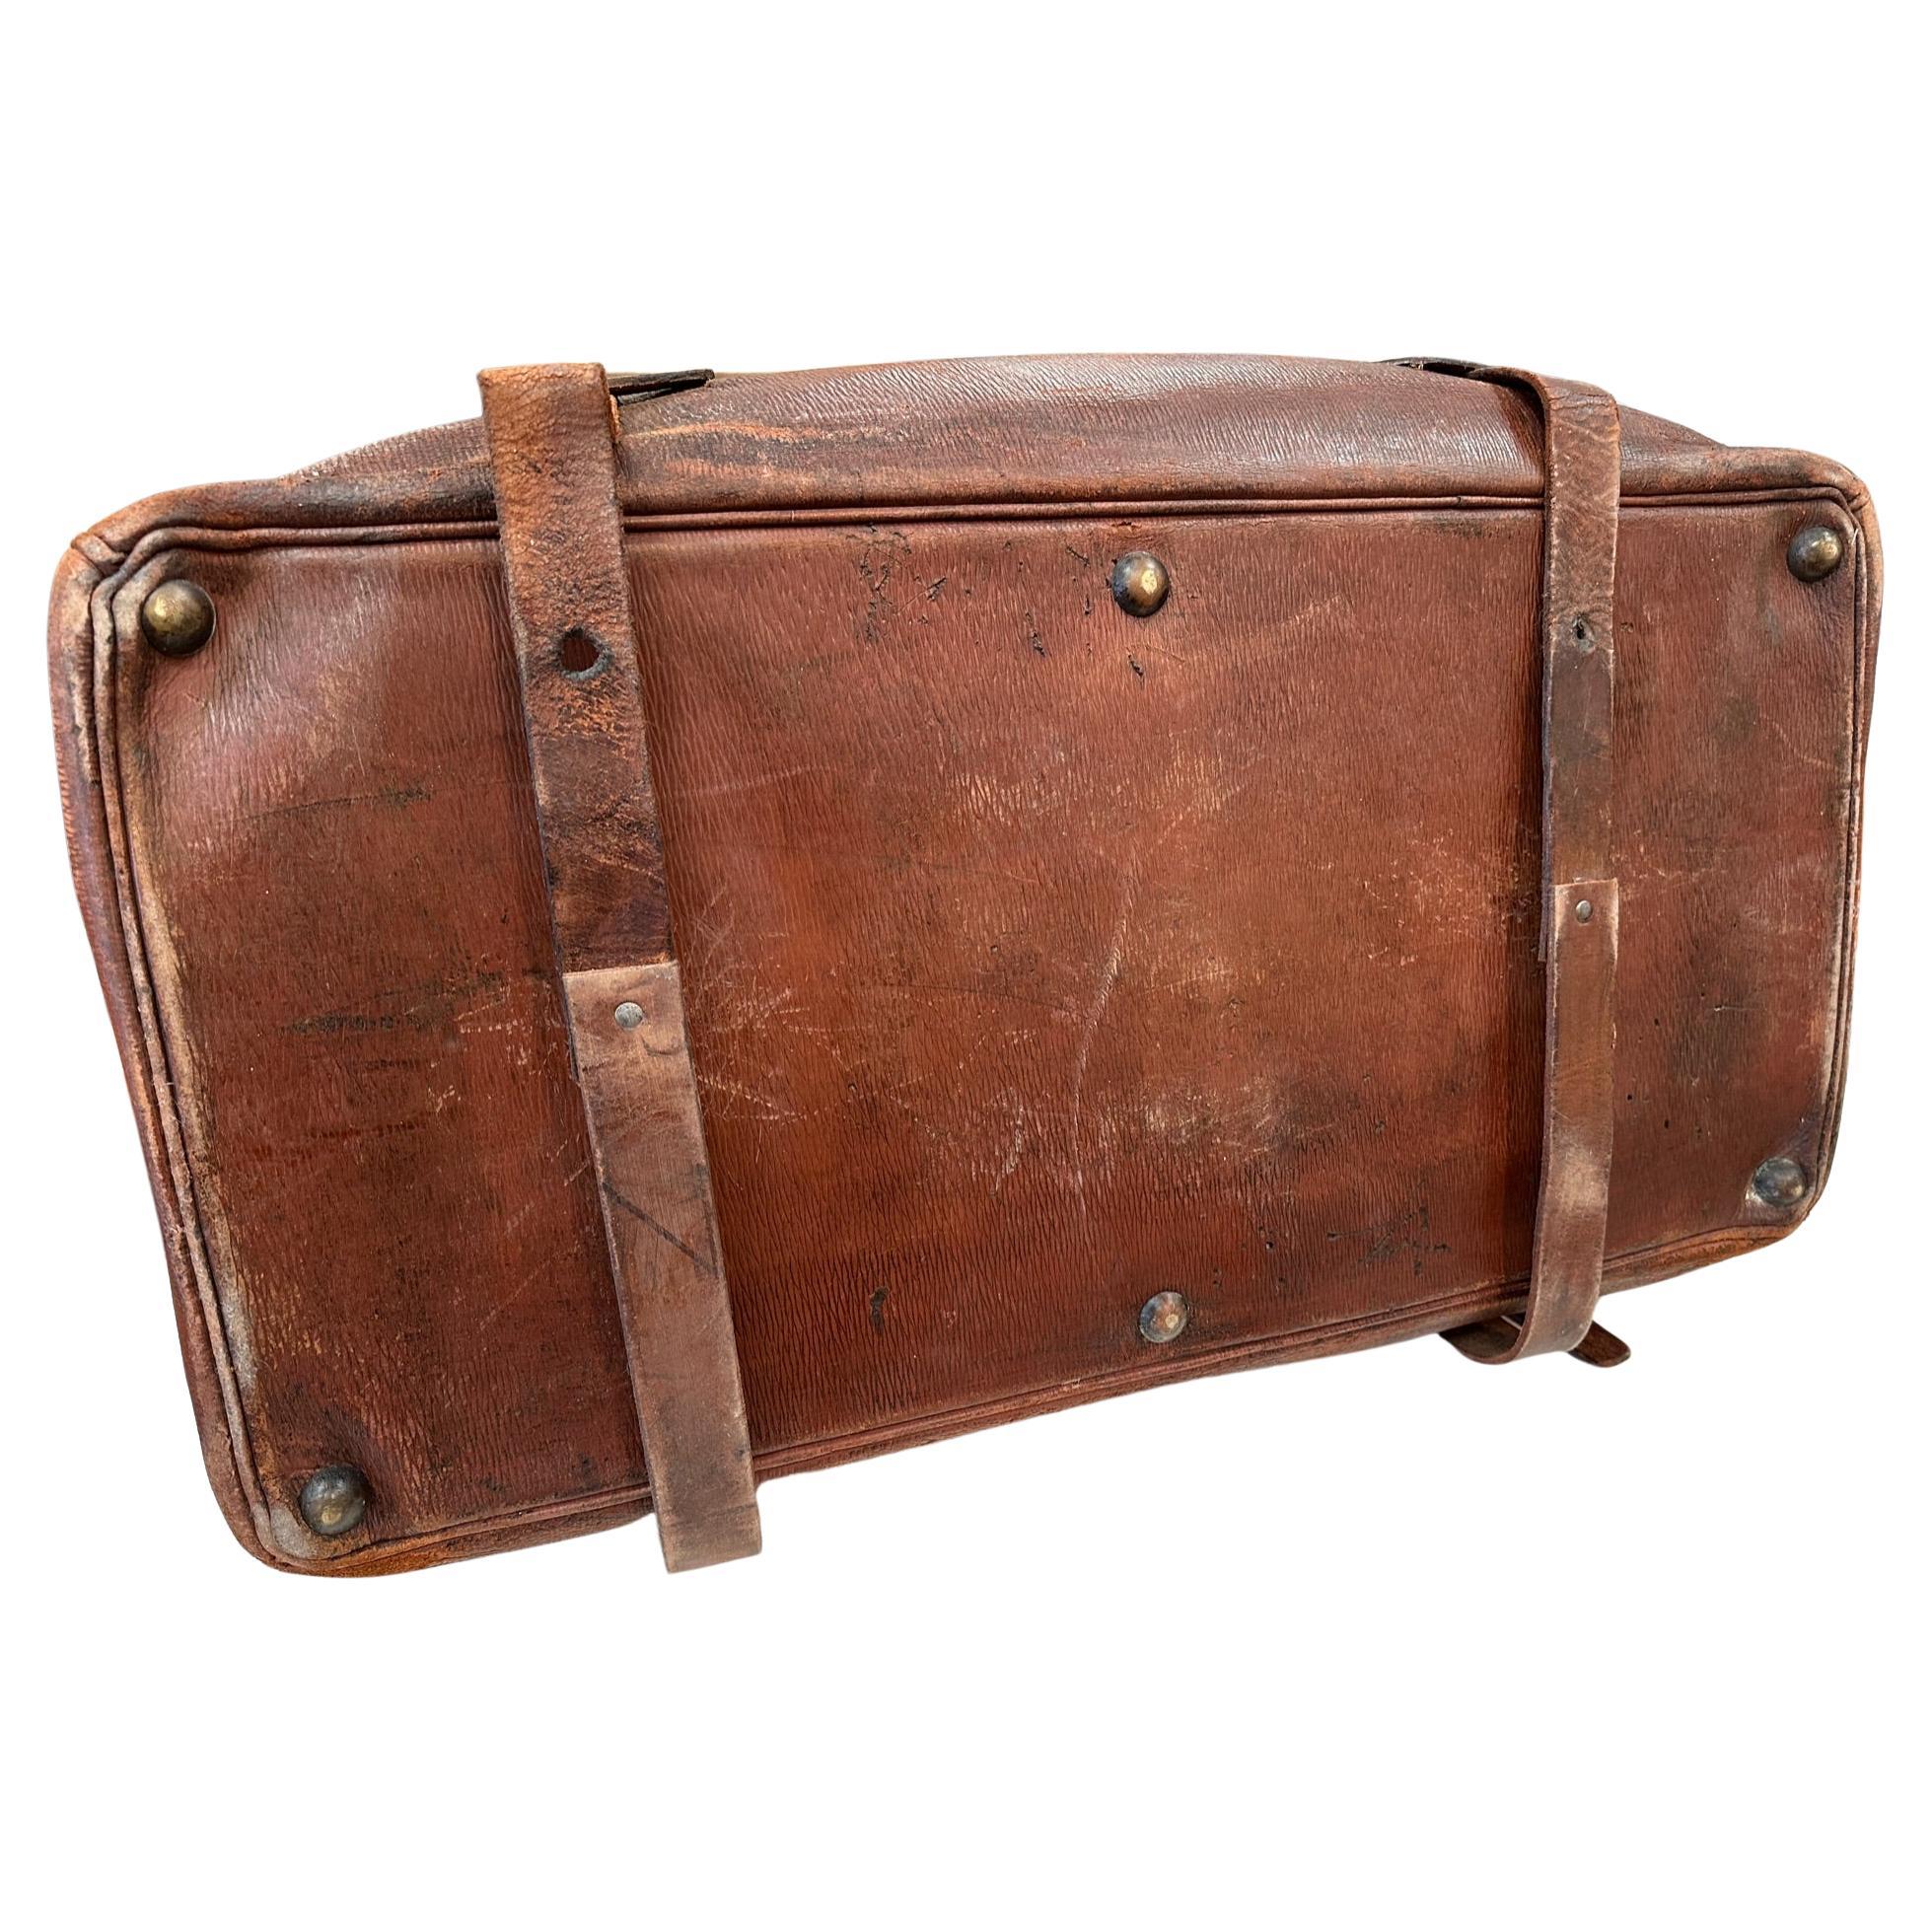 19th Century Large Antique Leather Traveling Luggage with Brass Accents For Sale 1